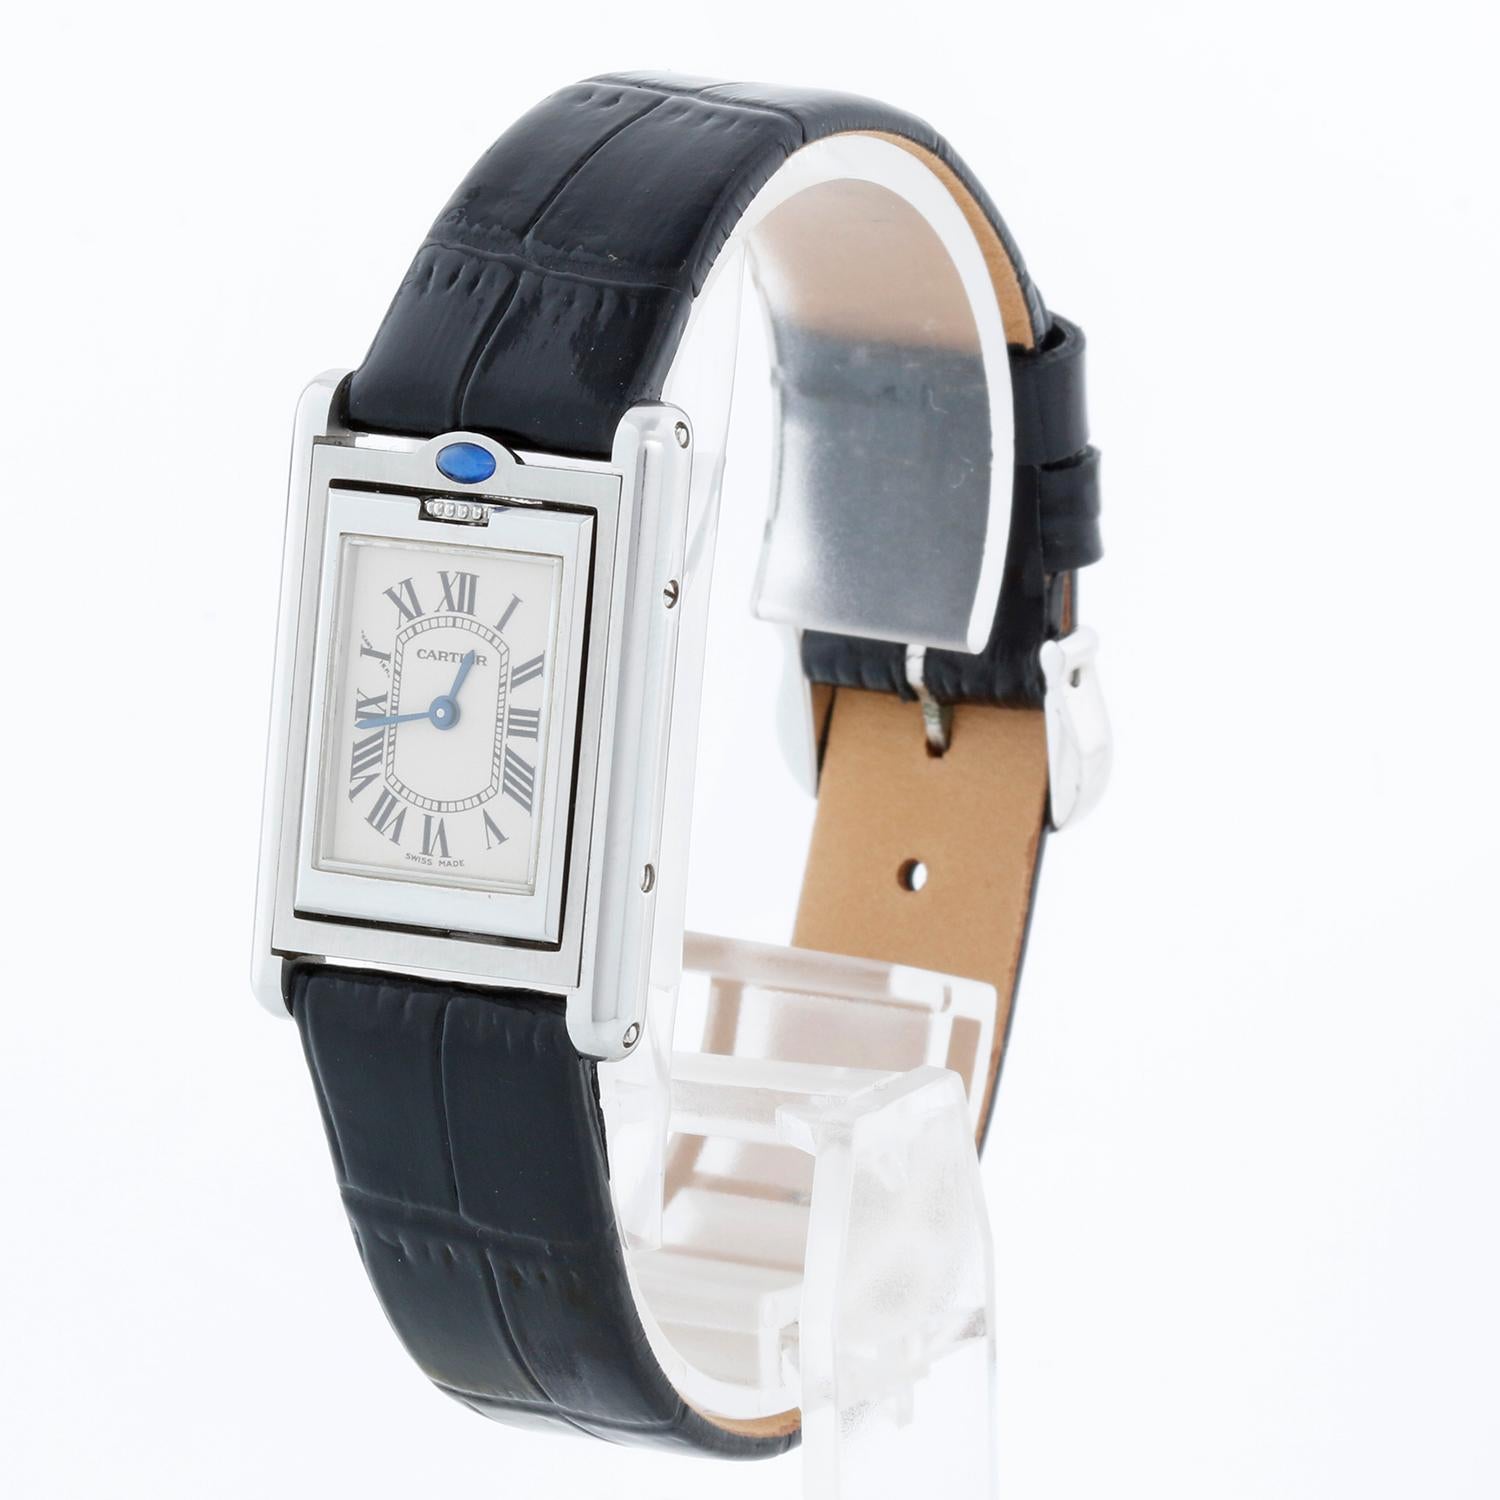 Cartier Tank Basculante Watch Ref 2386 Ladies - Quartz. Stainless steel case ( 22 mm x 36 mm ). Silver dial with Roman numerals. Blue  strap with tang buckle. Pre-owned with custom box.